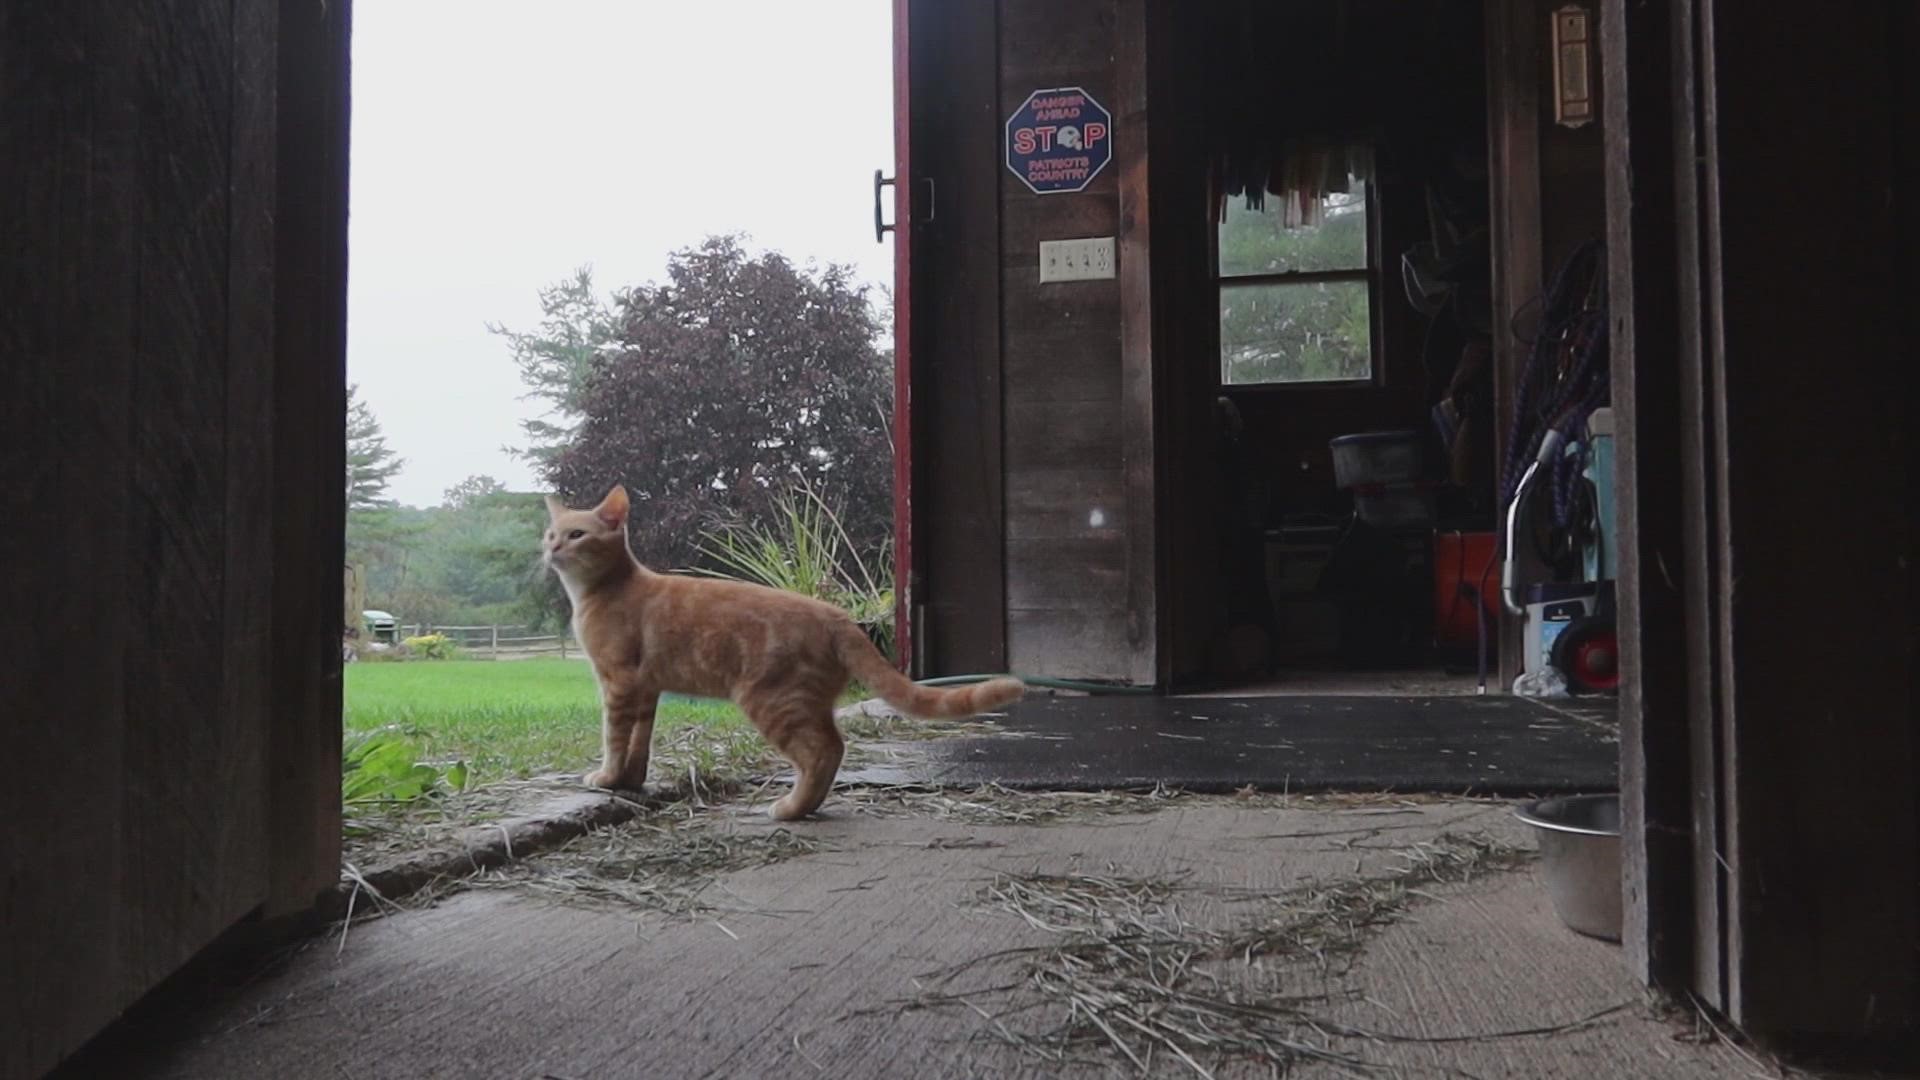 NEWS CENTER Maine's Griffin Stockford takes us to Bowdoinham, where a young barn cat named Paddy faced his first day of fall.